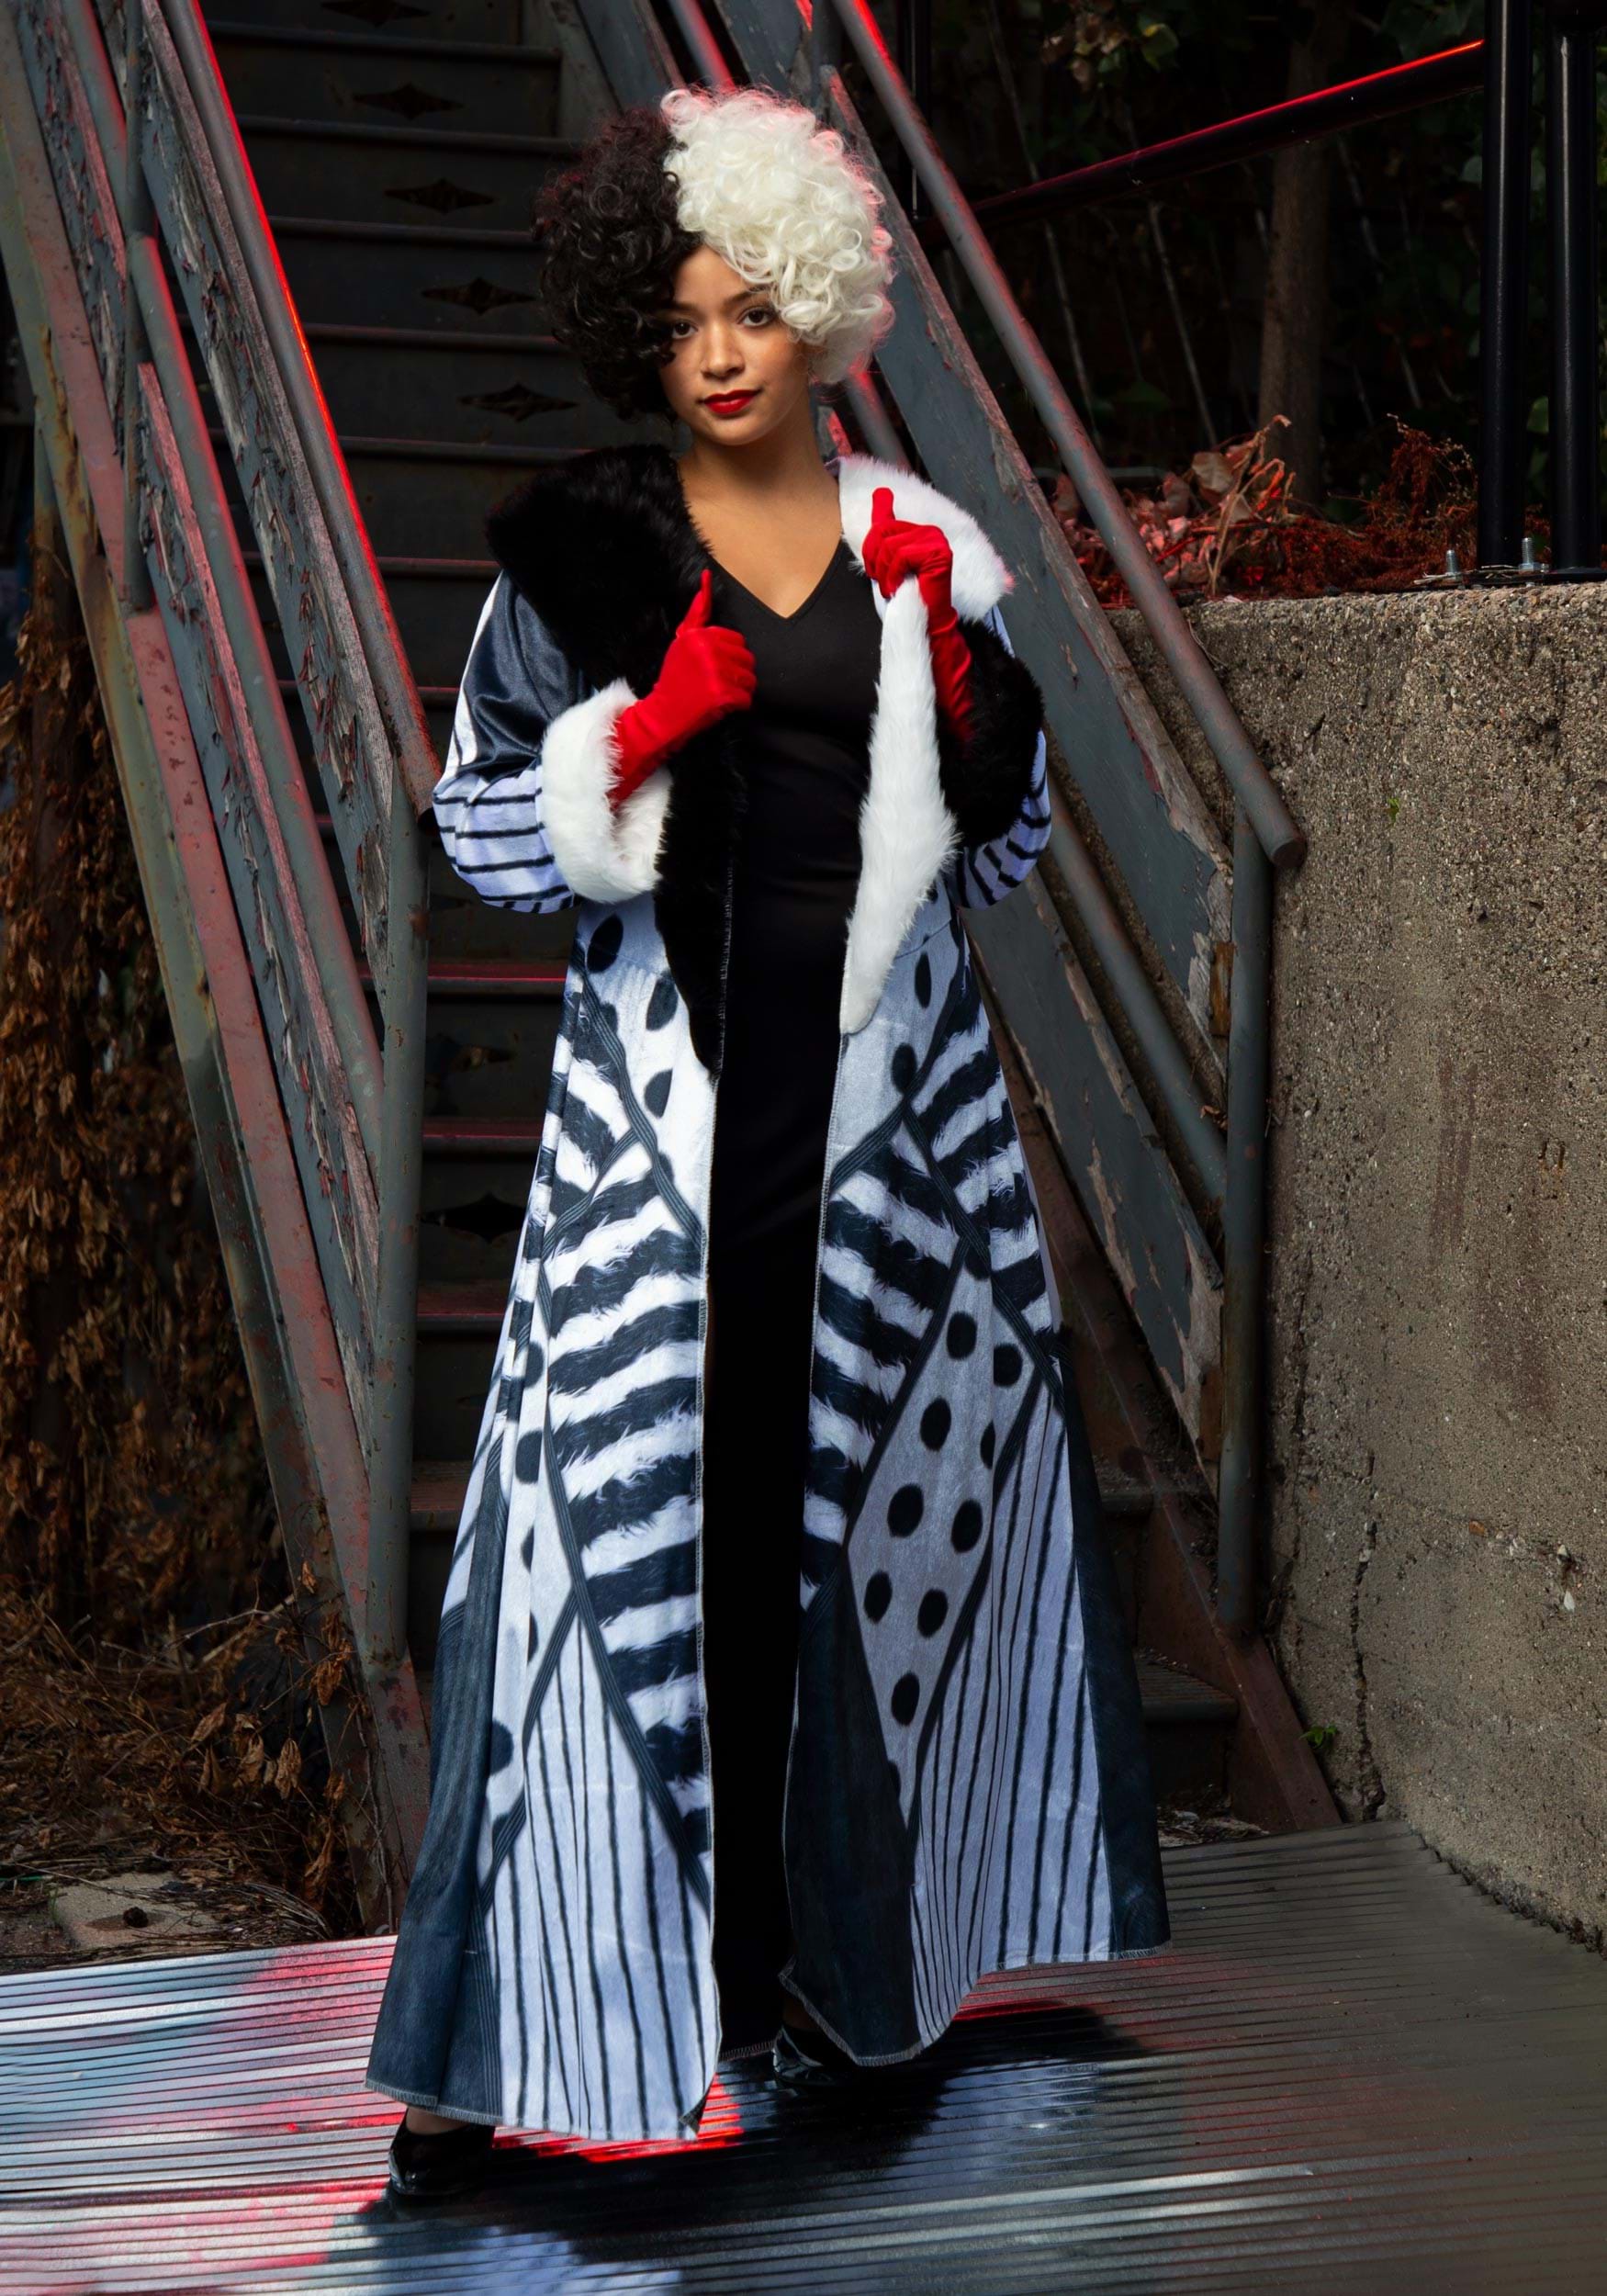 CRUELLA'S COSTUMES ARE THE STAR OF THIS FASHION FILM - Dress The Part